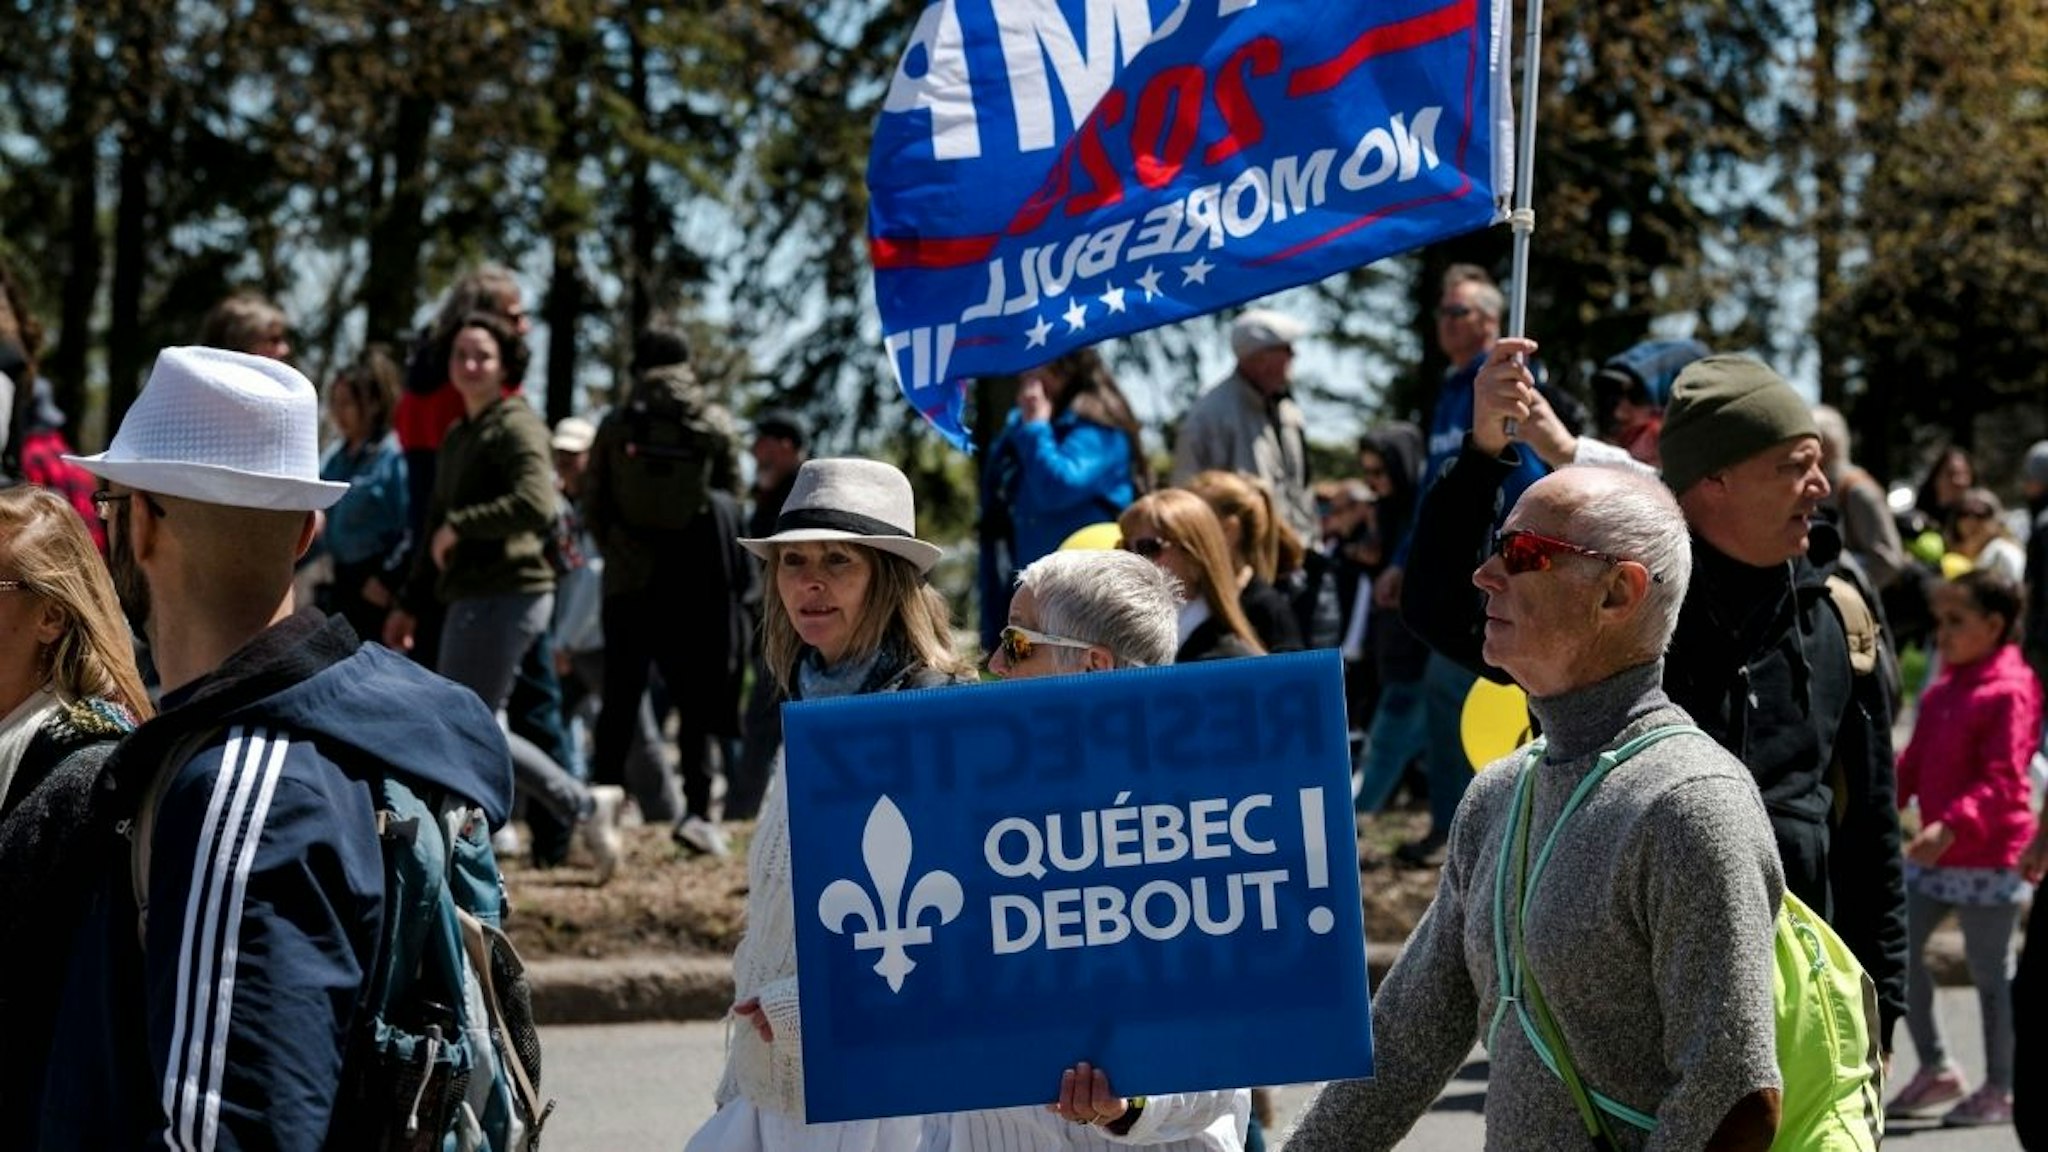 Demonstrators march against new Covid-19 anti-mask and anti-curfew restrictions, in Montreal on May 1, 2021.